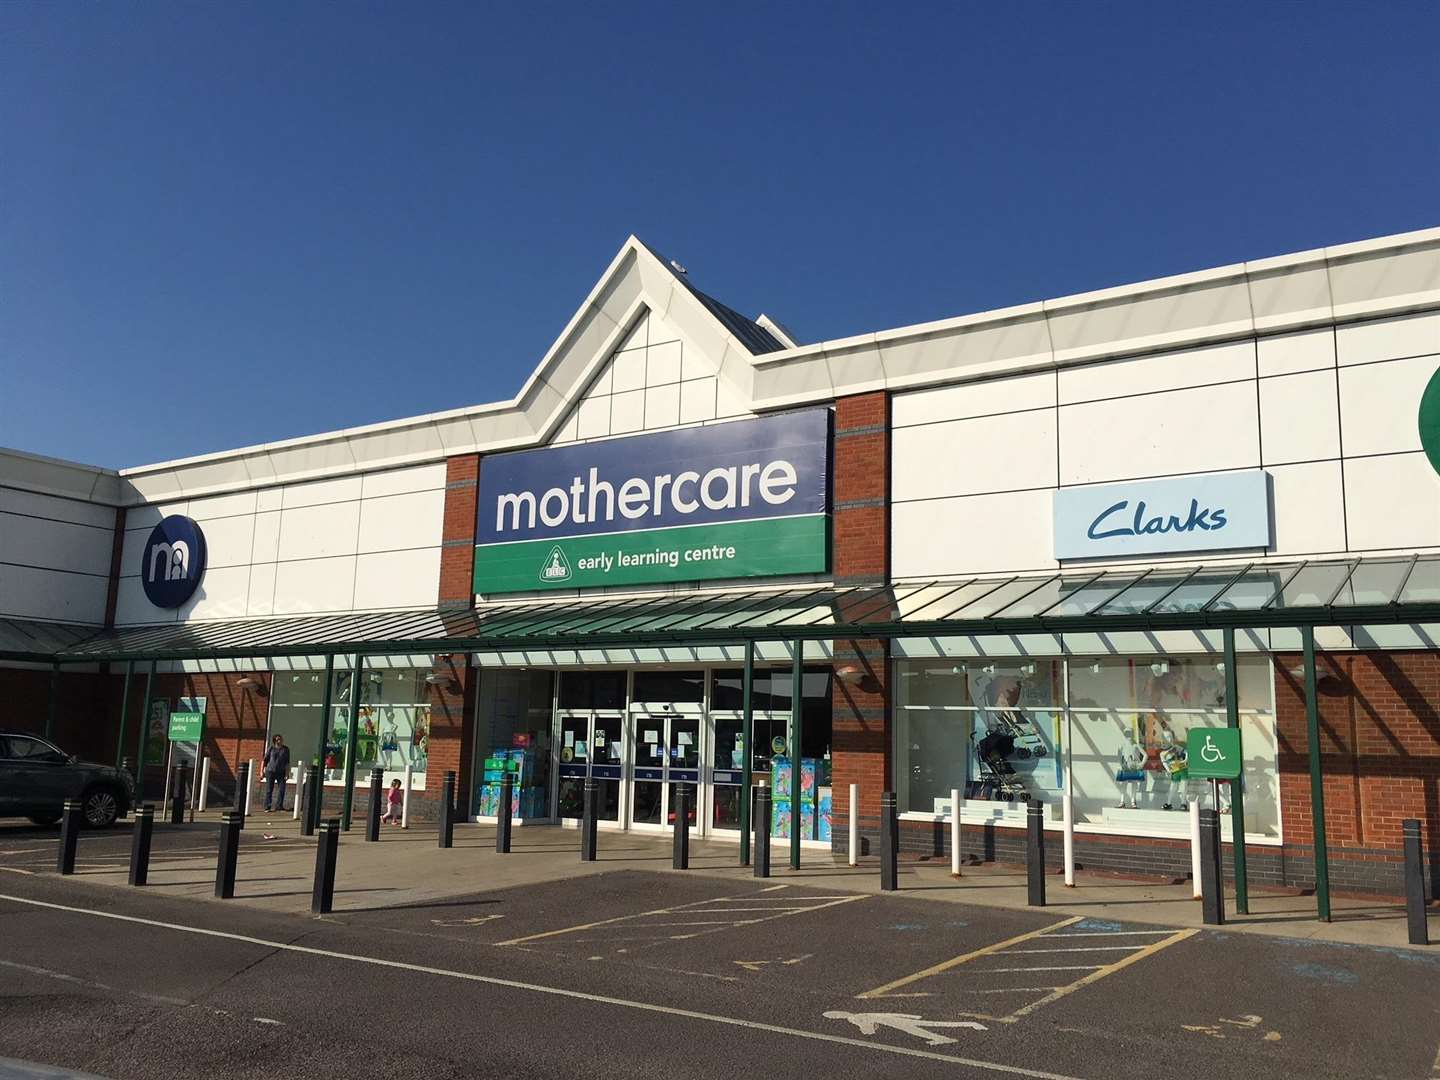 Mothercare currently has stores in Canterbury, Bluewater and Maidstone